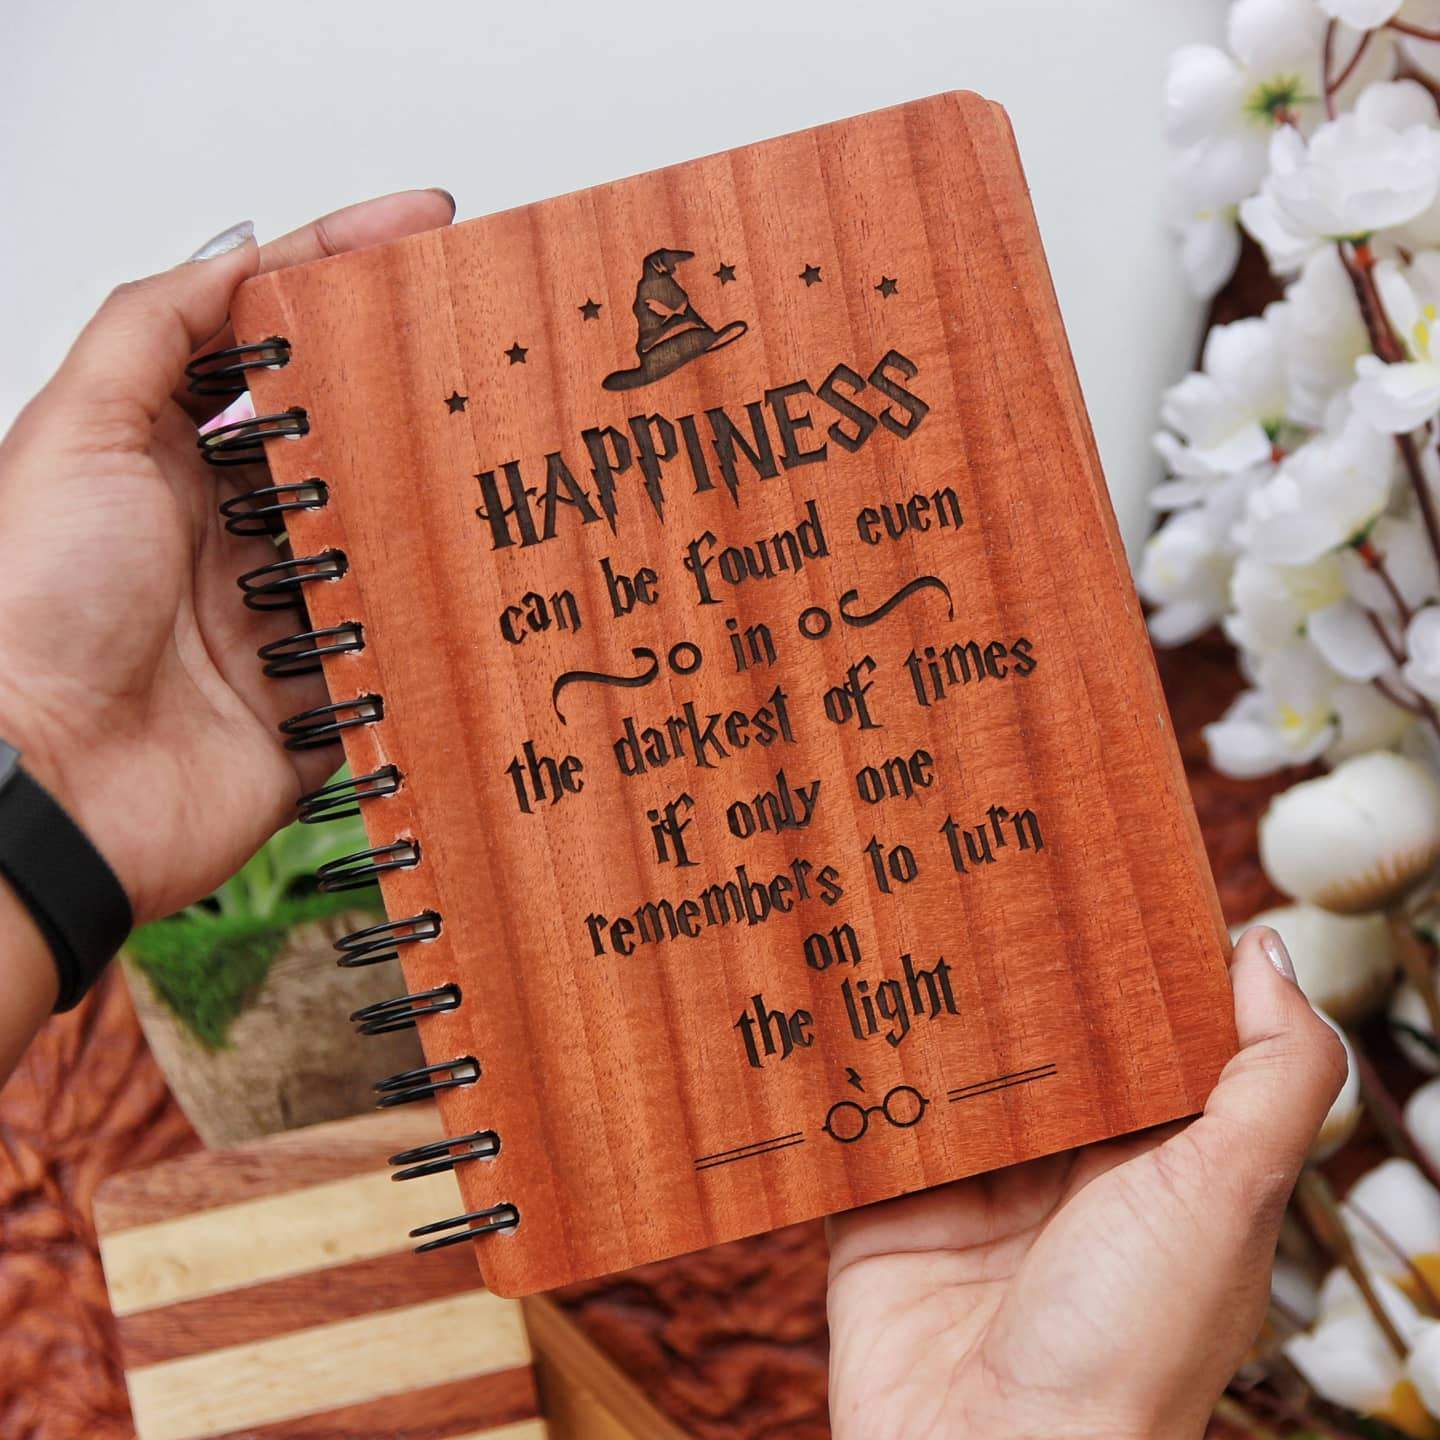 Happiness can be found in the darkest of times - Personalized Wooden Notebook